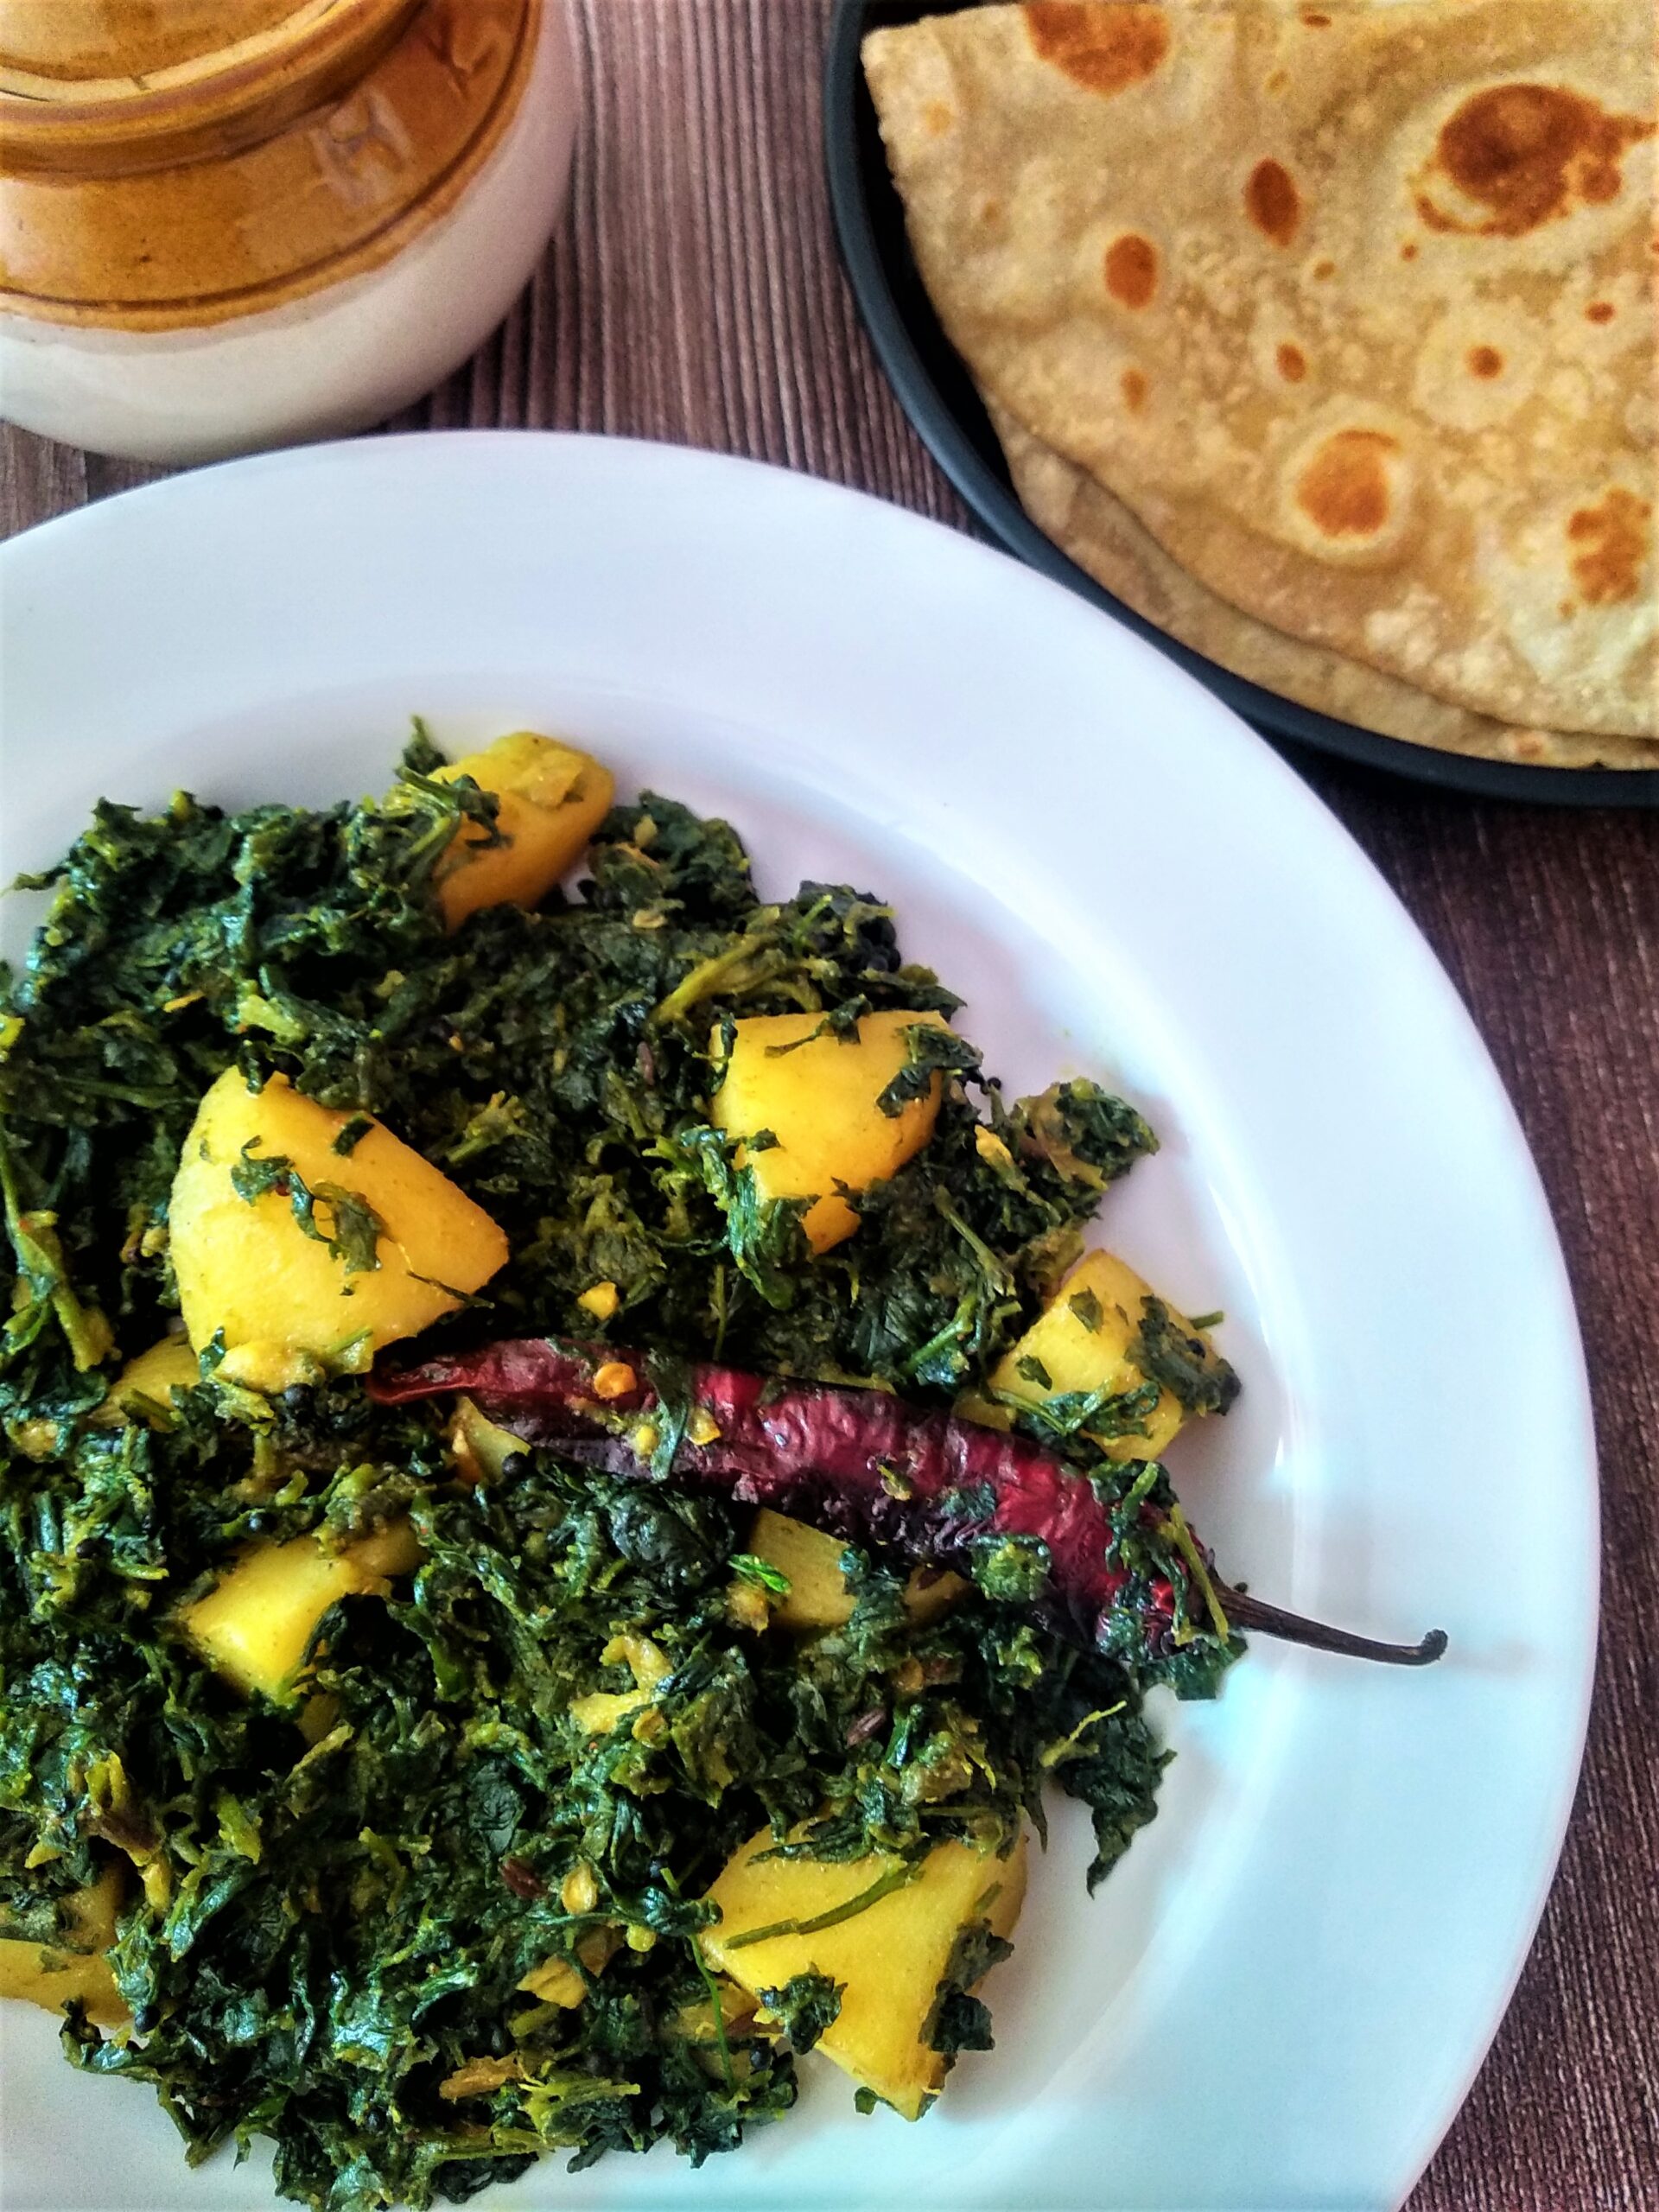 Aloo Methi | Sauteed Potatoes & Fenugreek Leaves Recipe https://thespicycafe.com/wp-content/uploads/2021/12/aloo-methi-scaled.jpg https://thespicycafe.com/tag/diabetic-friendly/